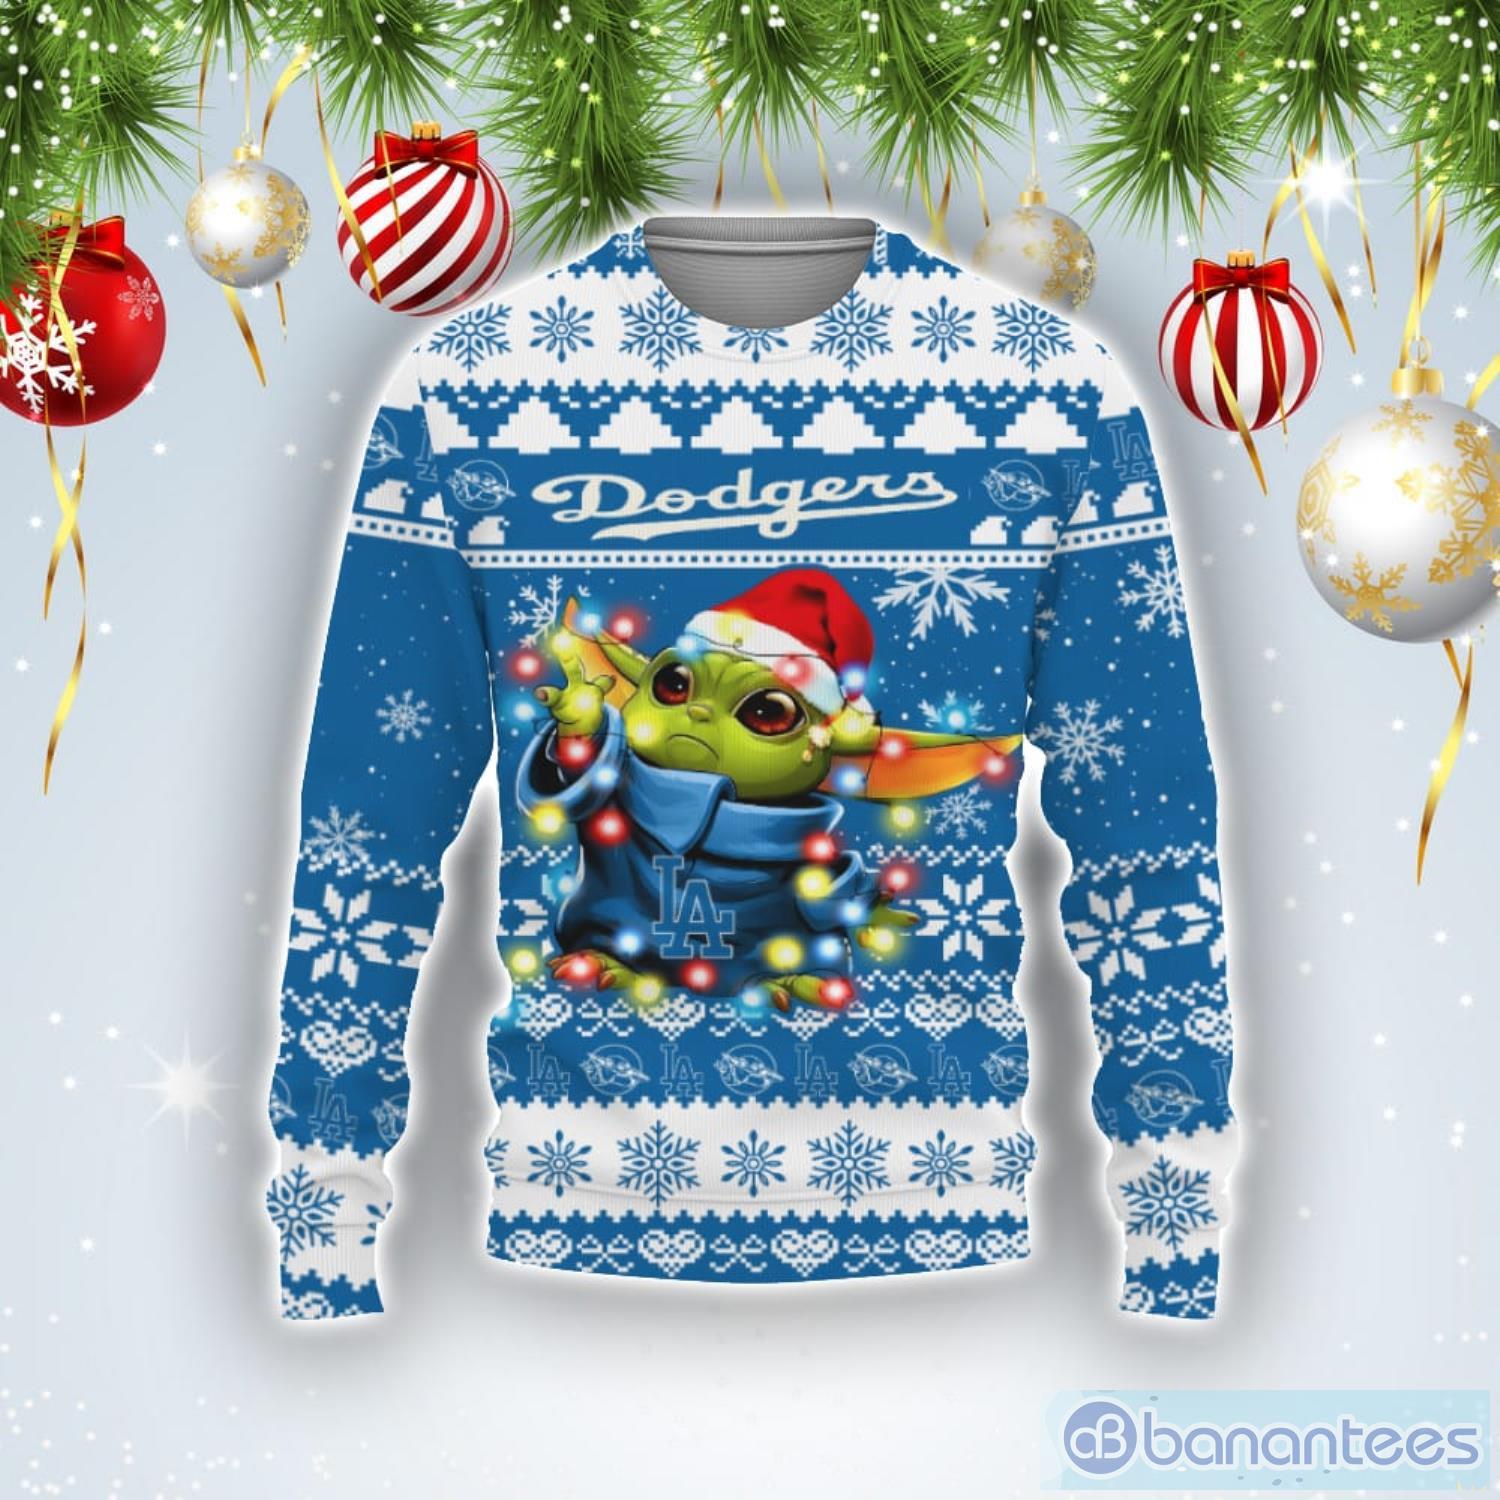 Los Angeles Dodgers Baby Yoda Star Wars Sports Football American Ugly Christmas Sweater Product Photo 1